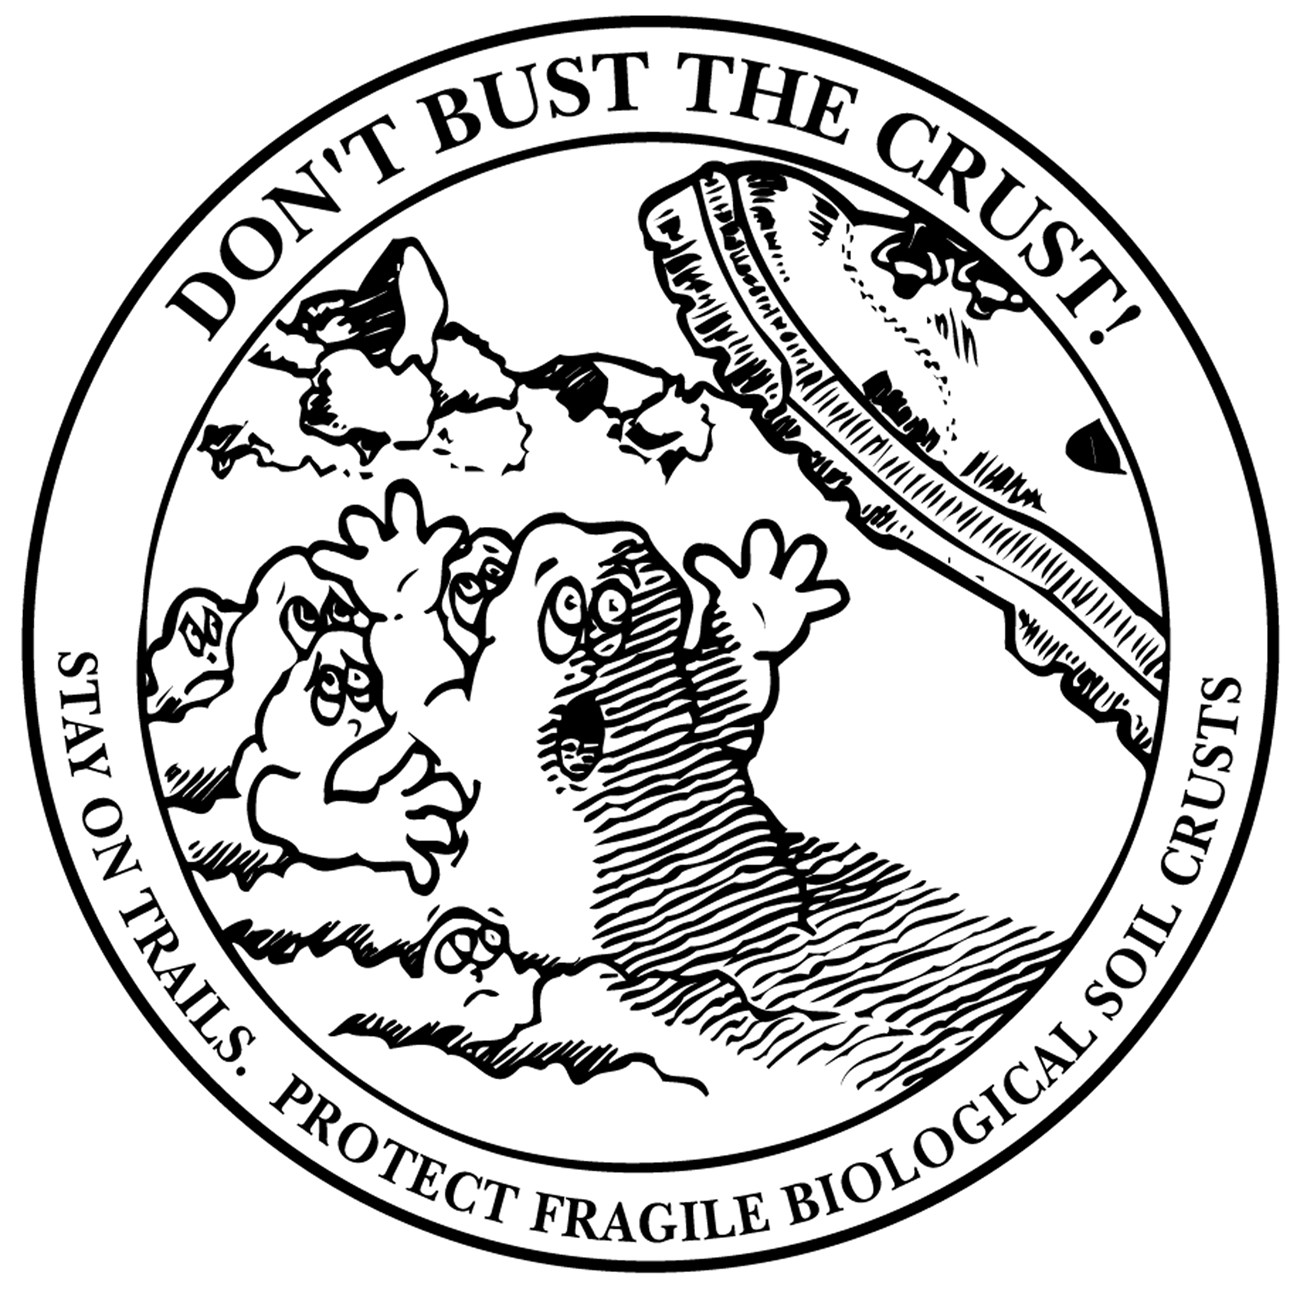 A line drawing of a hiking boot hovering over lumpy soil. The soil is personified with screaming faces and arms waving around. Text circles the image, reading "Don't bust the crust! Stay on trails. Protect fragile biological soil crusts."